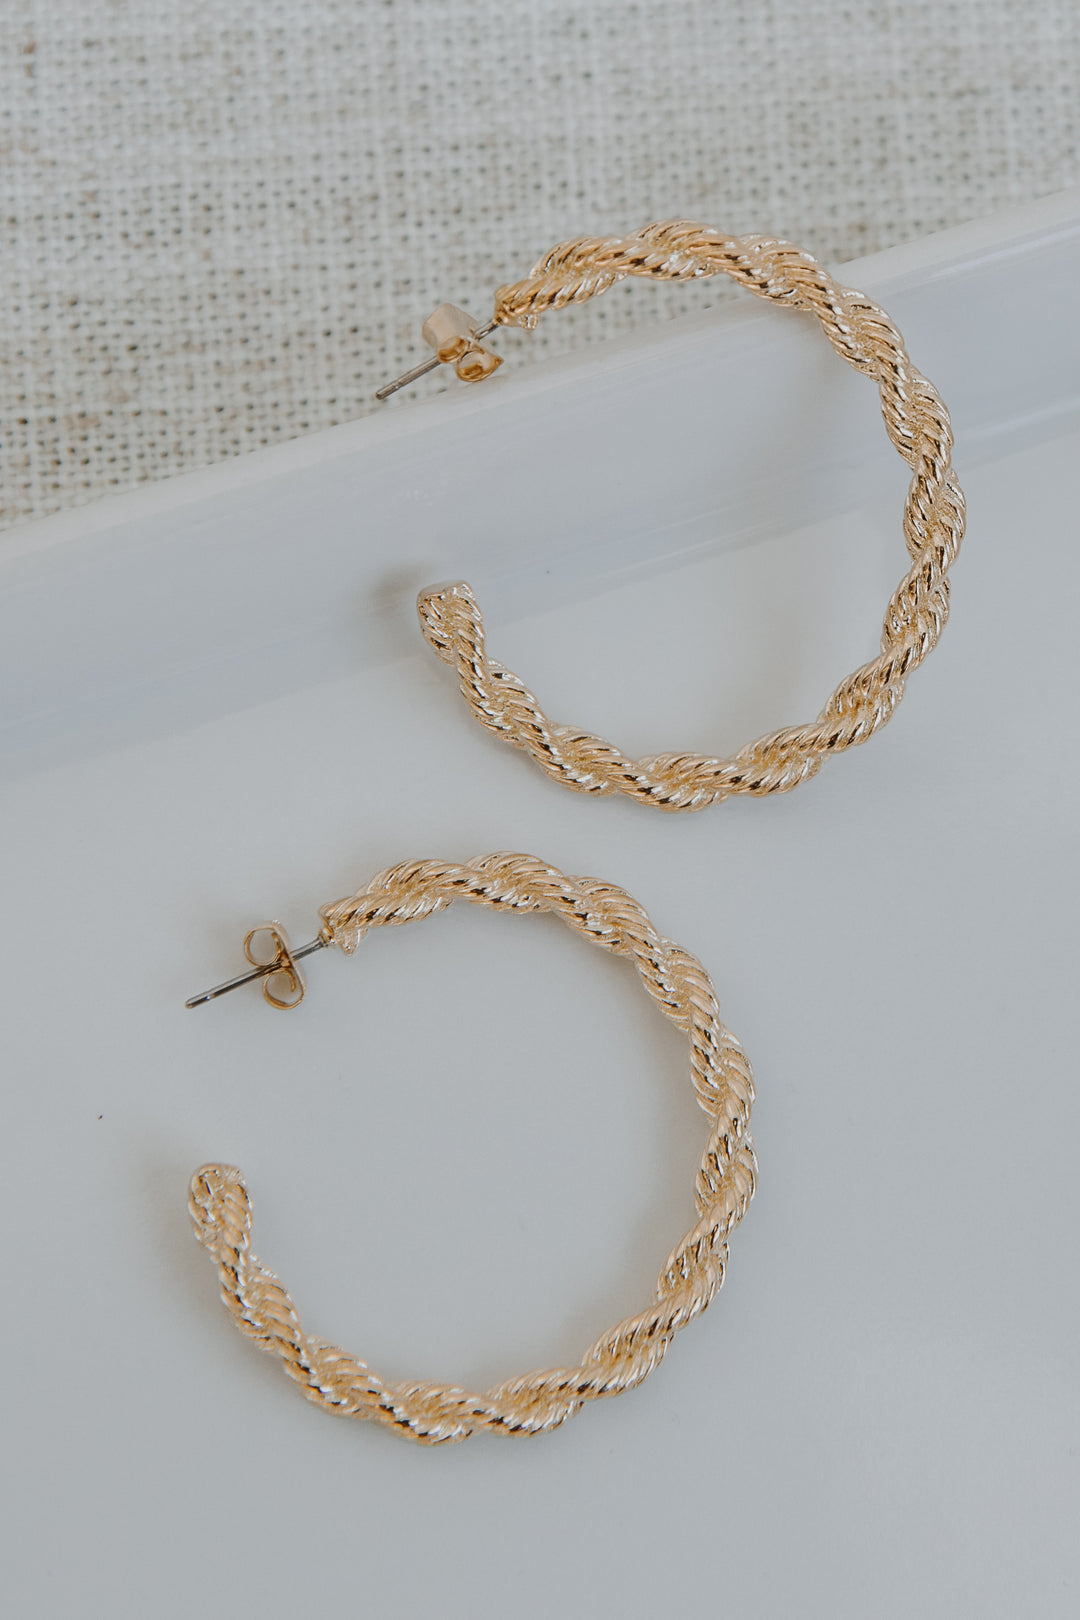 Gold Twisted Hoop Earrings from dress up